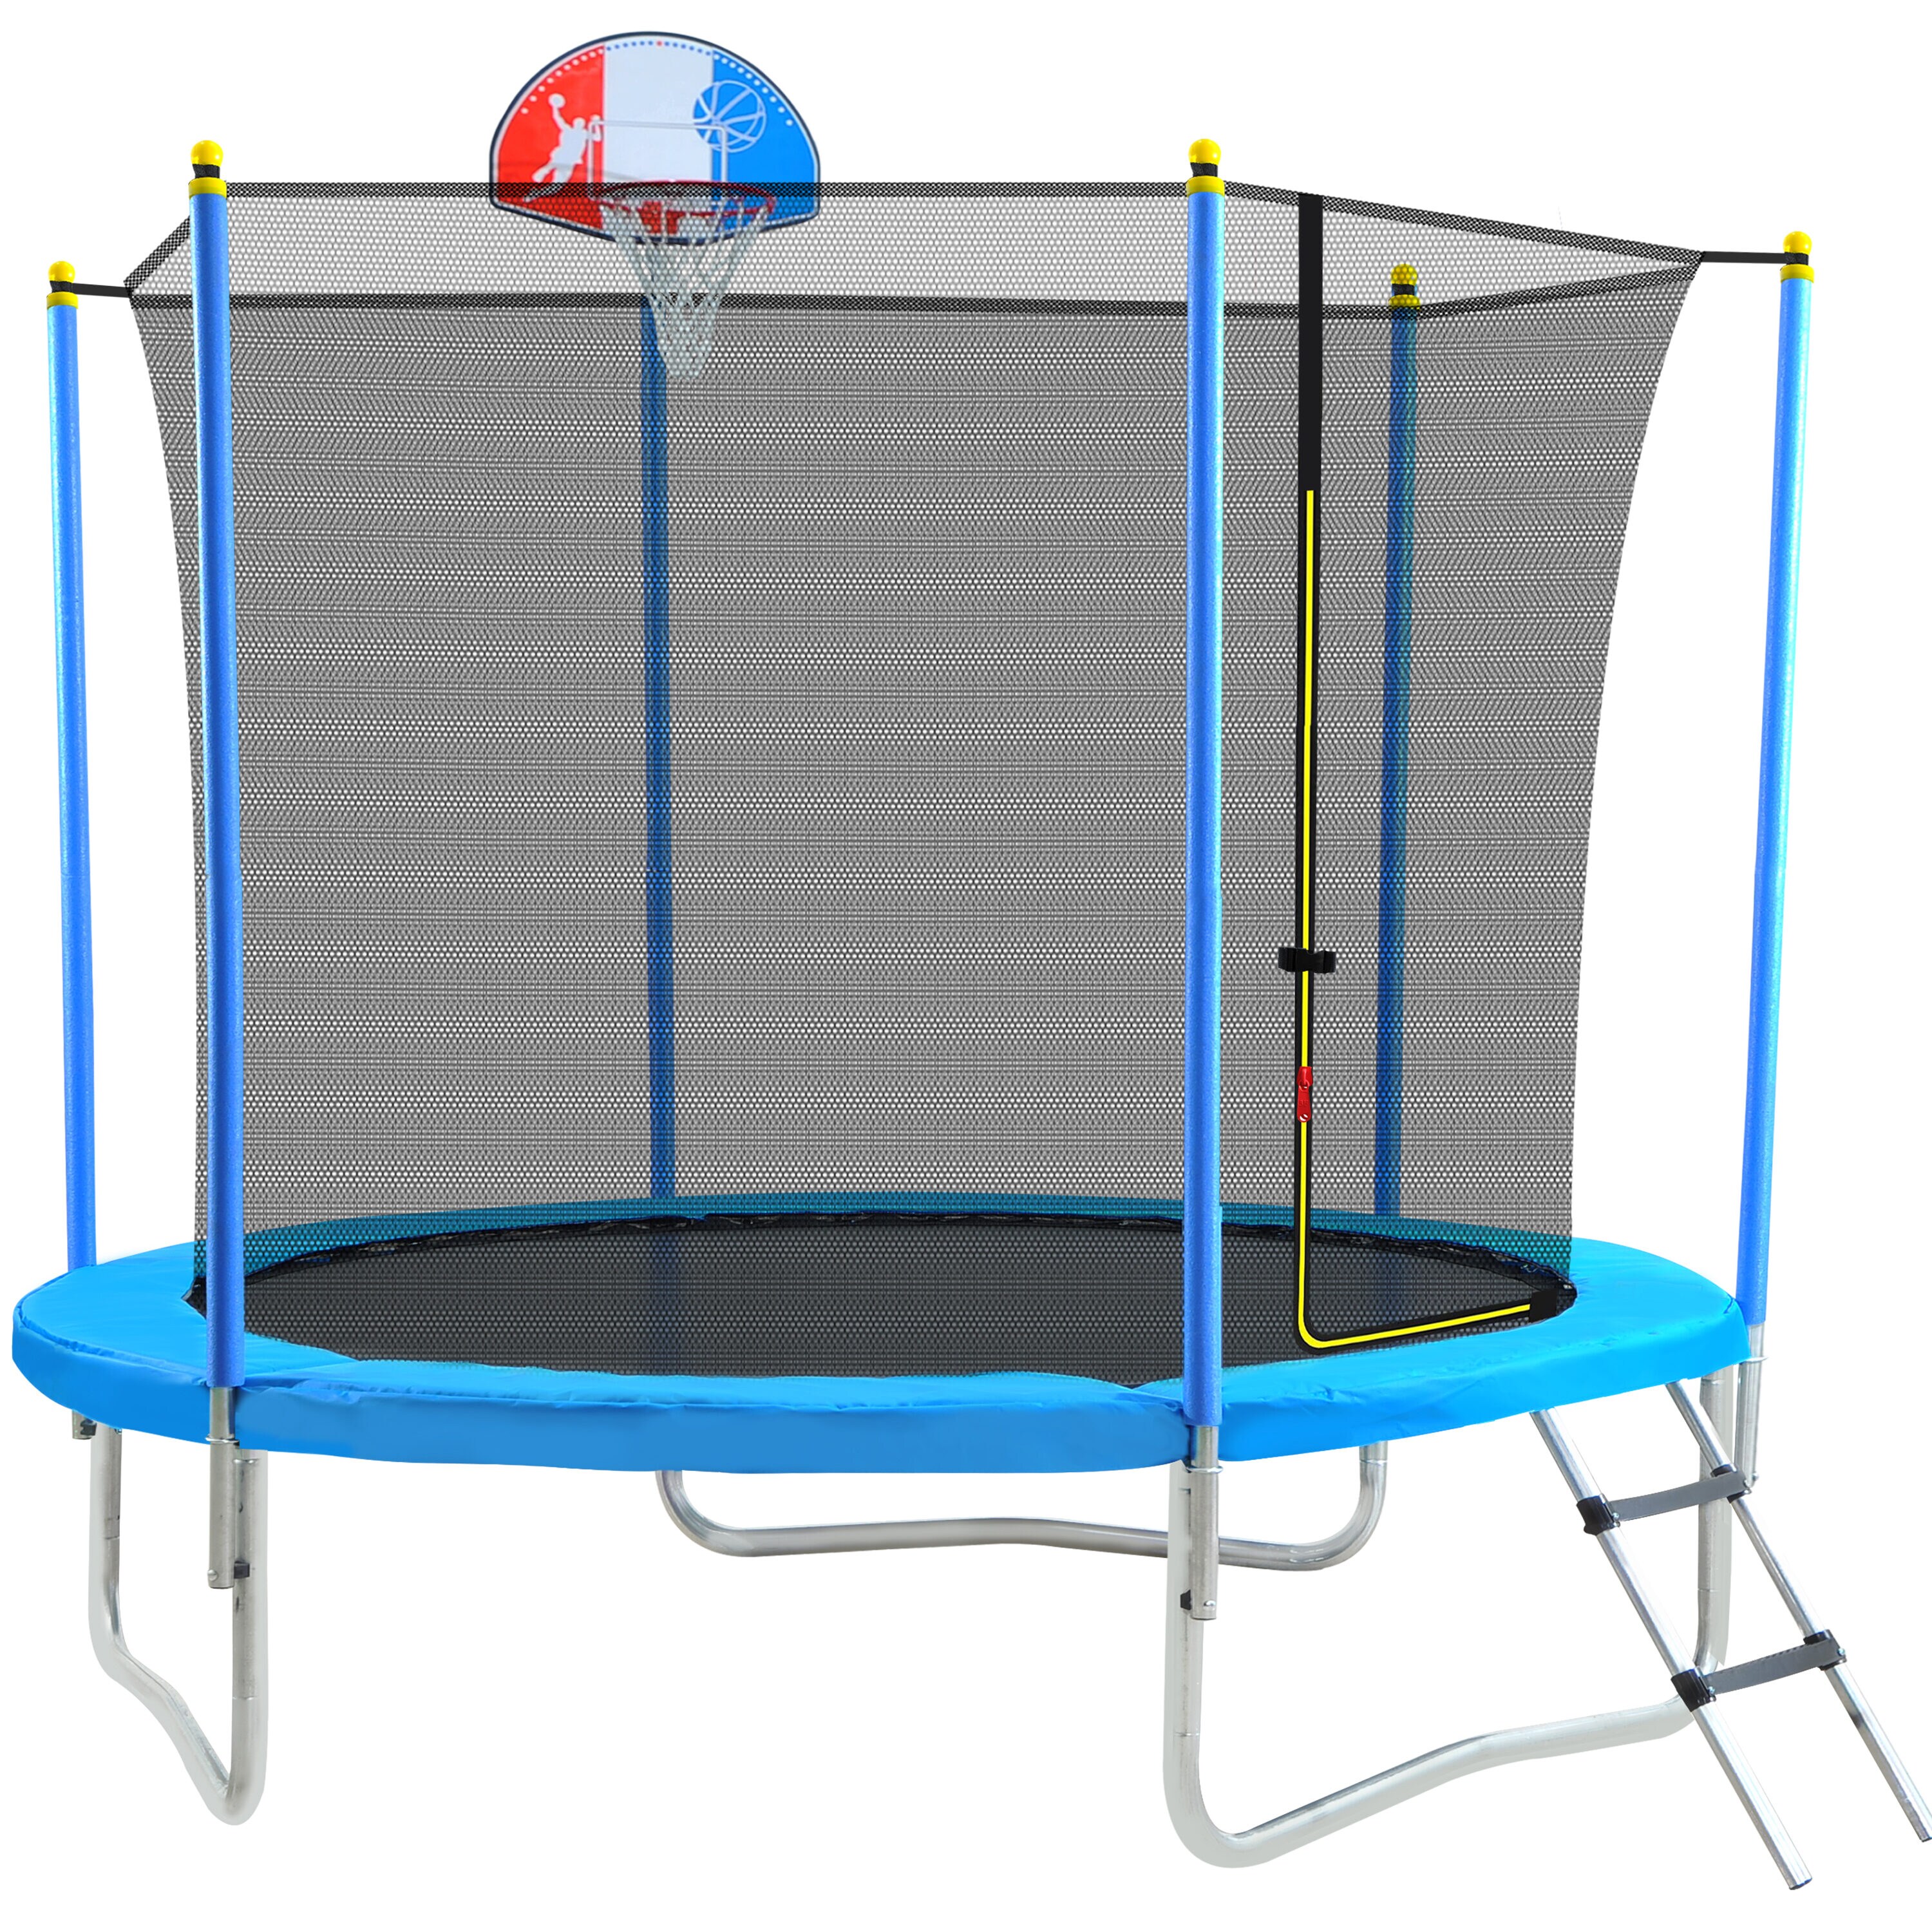 maocao hoom 10 ft. Round Backyard Trampoline with Safety Enclosure, Basketball Hoop and Ladder in Blue